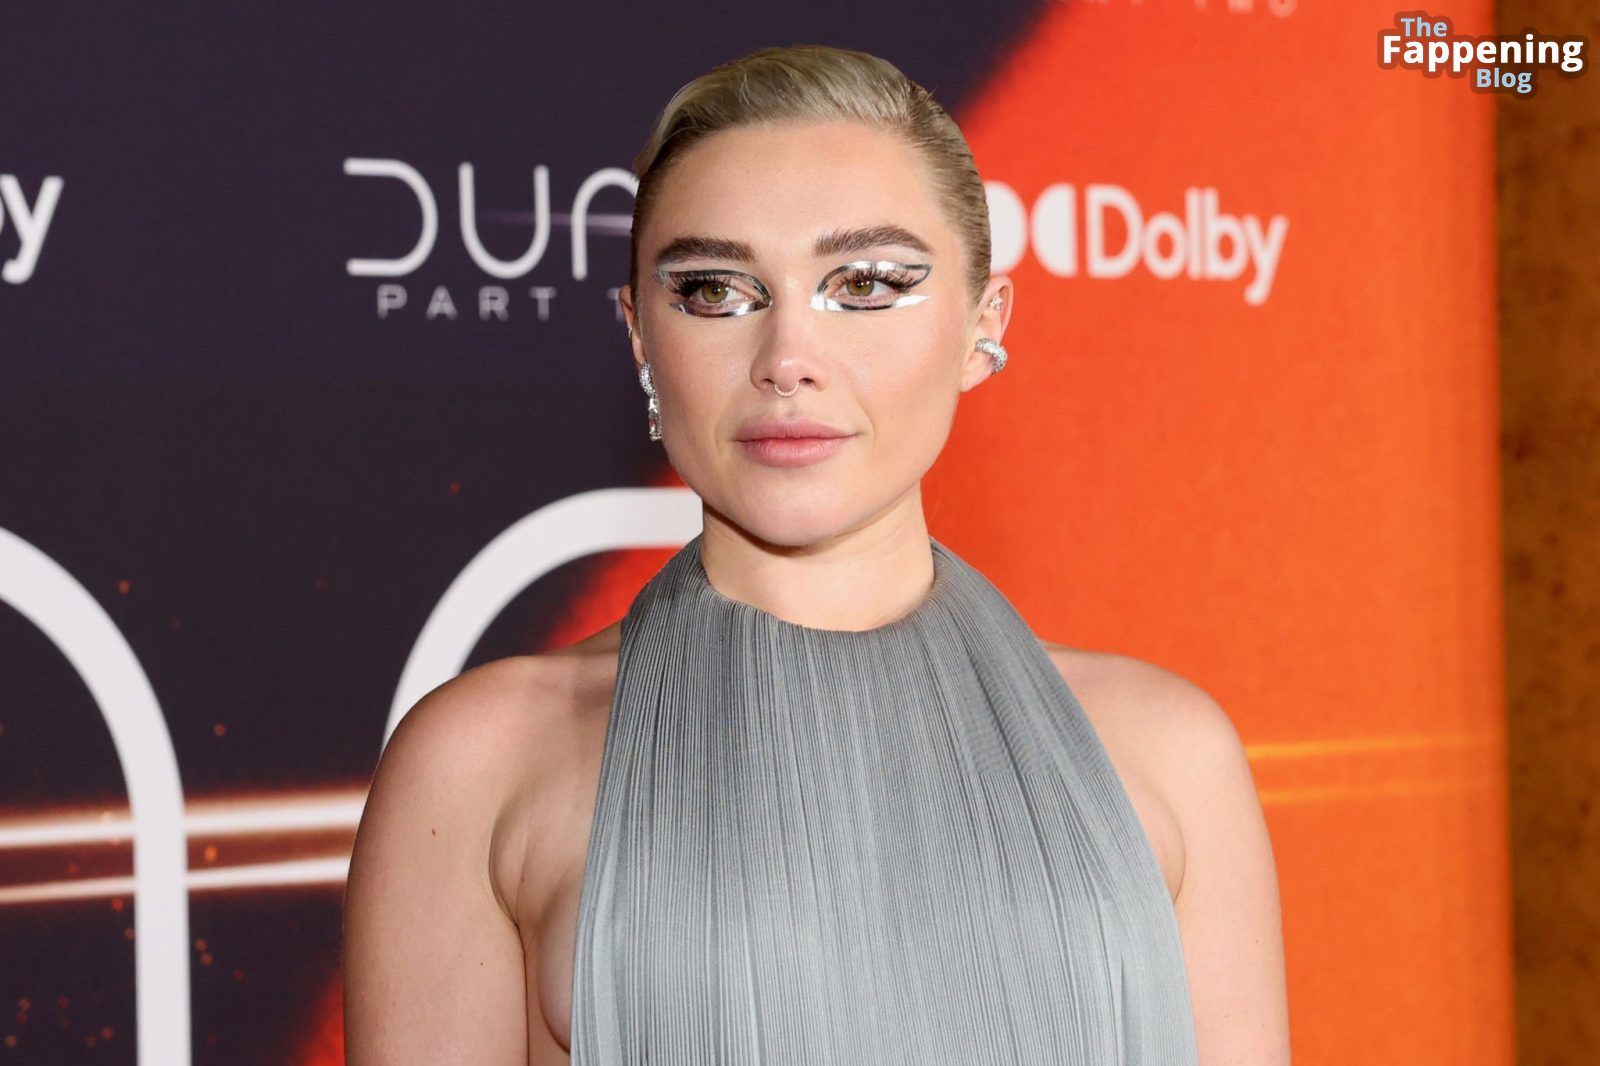 florence-pugh-braless-side-boobs-dune-part-two-premiere-nyc-18-thefappeningblog.com_.jpg